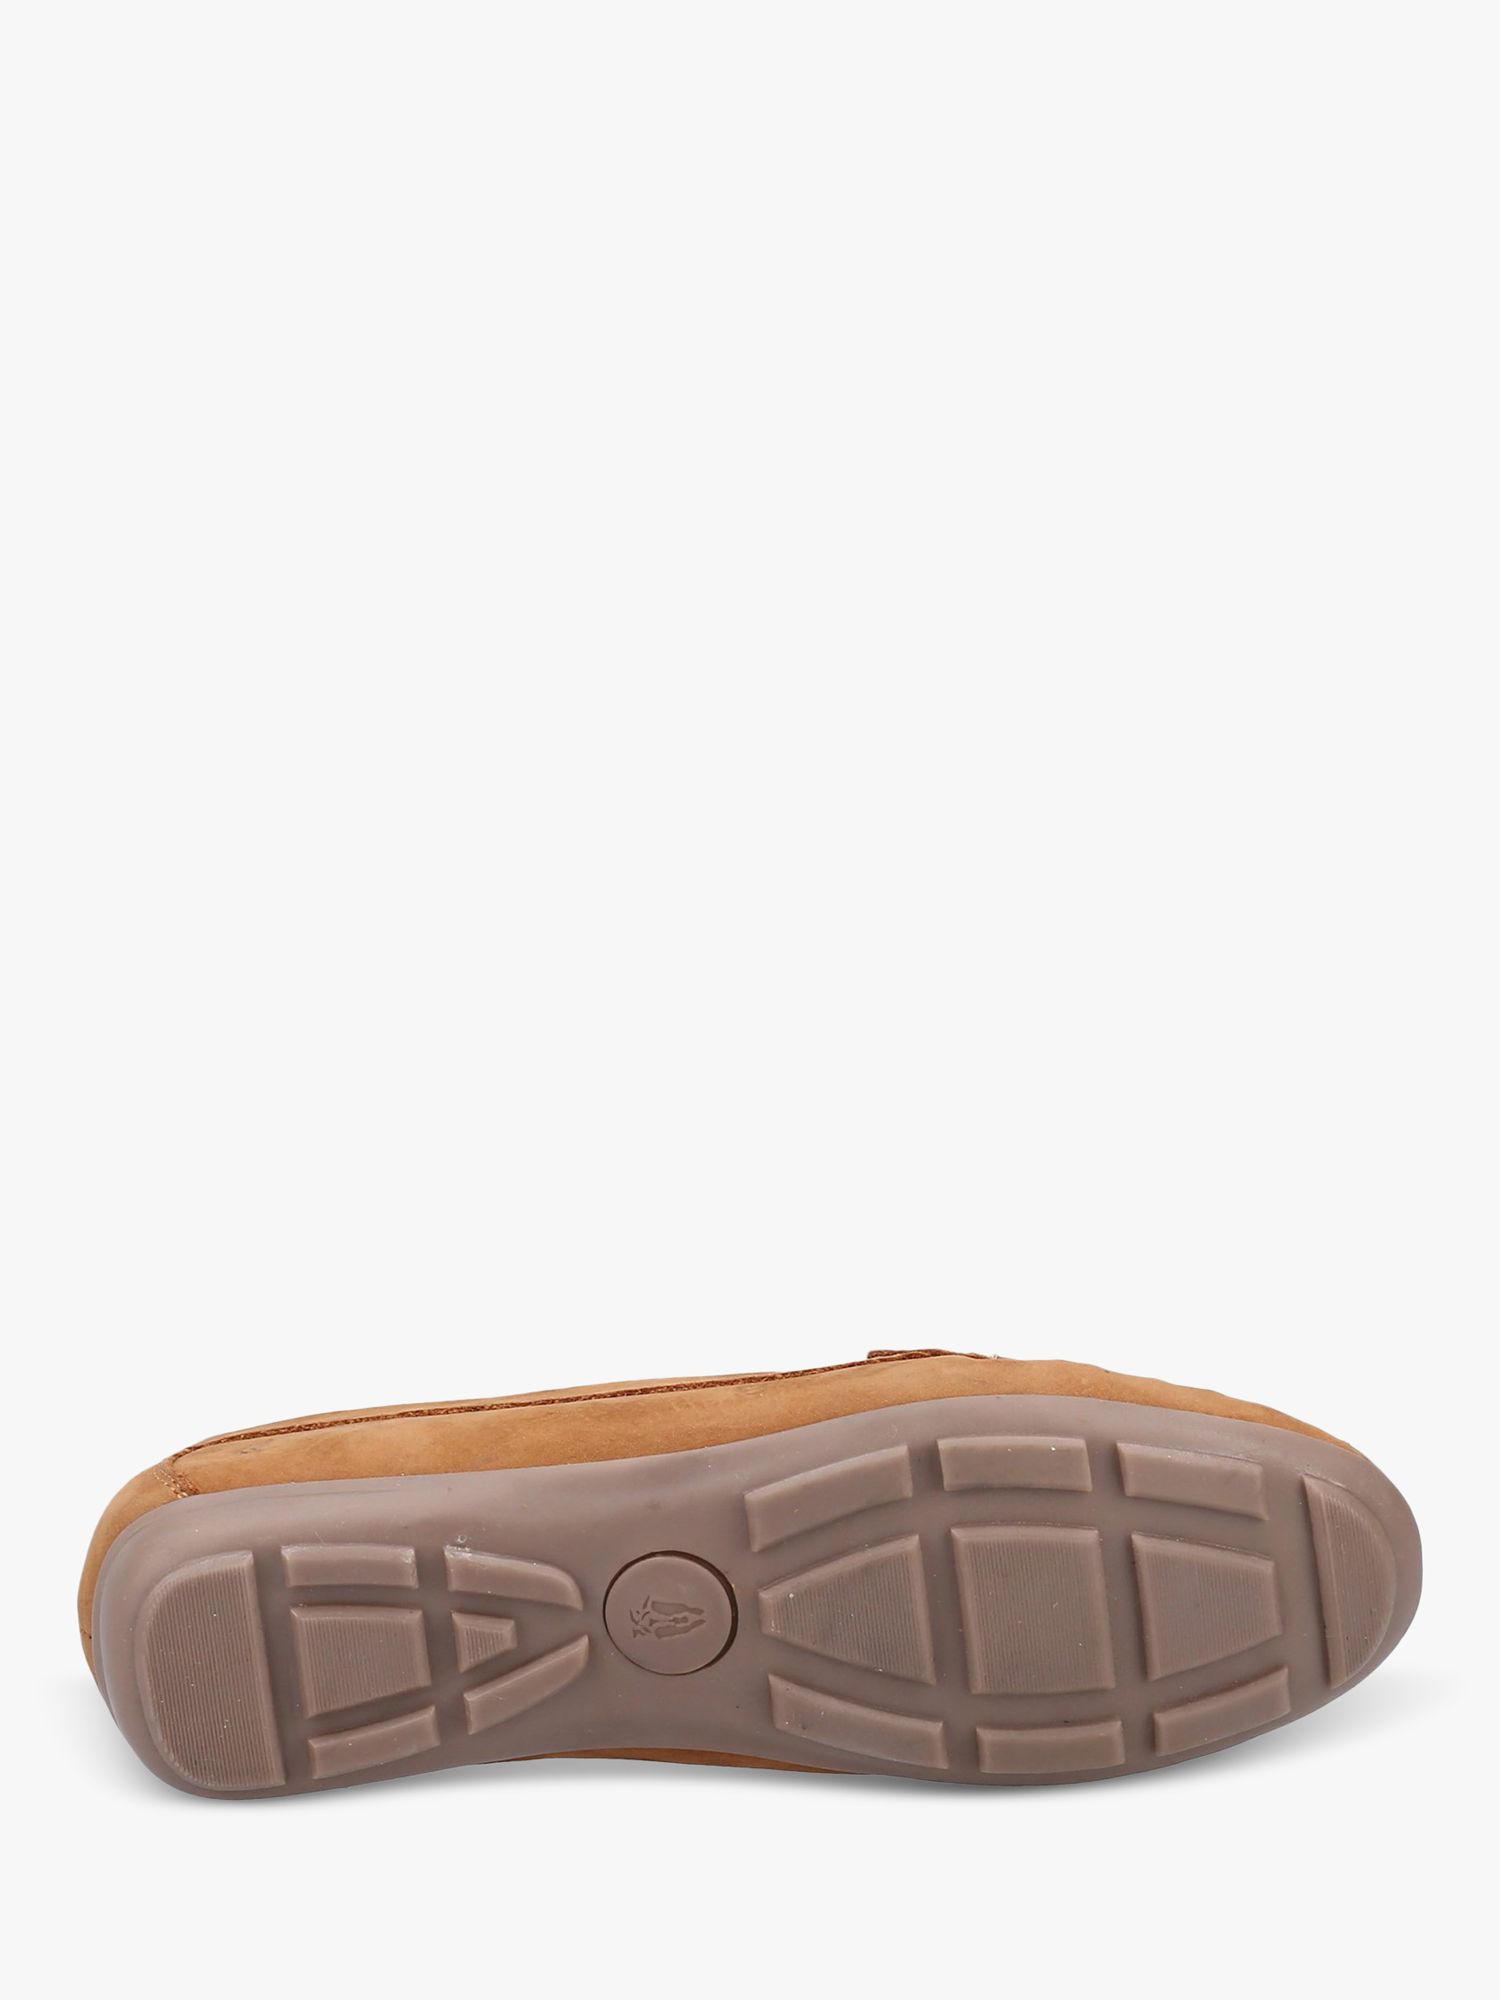 Hush Puppies Molly Suede Snaffle Loafers, Tan at John Lewis & Partners